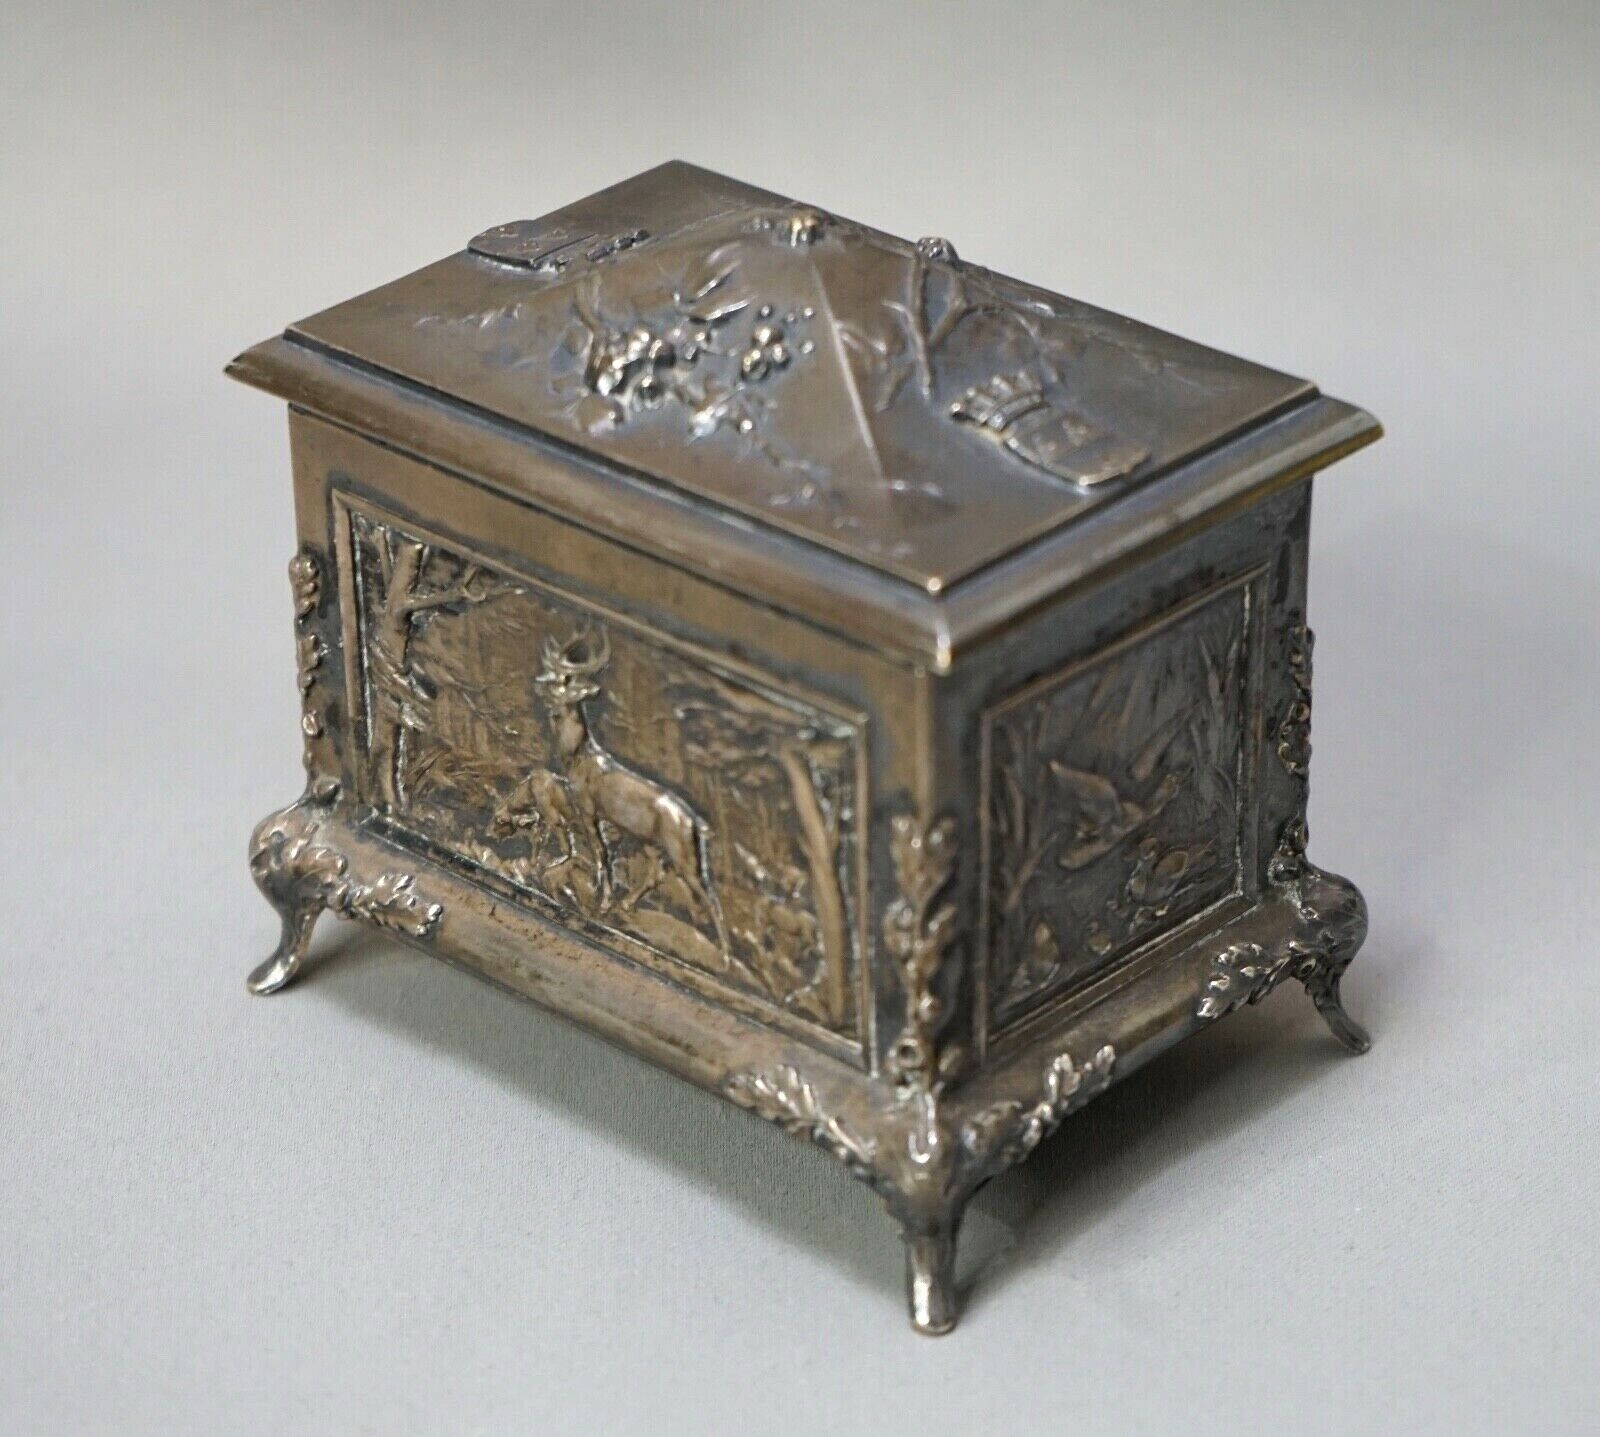 19c.French Louis Armand Rault Silver-plate Brass Wild Animal Hunting Jewelry Box